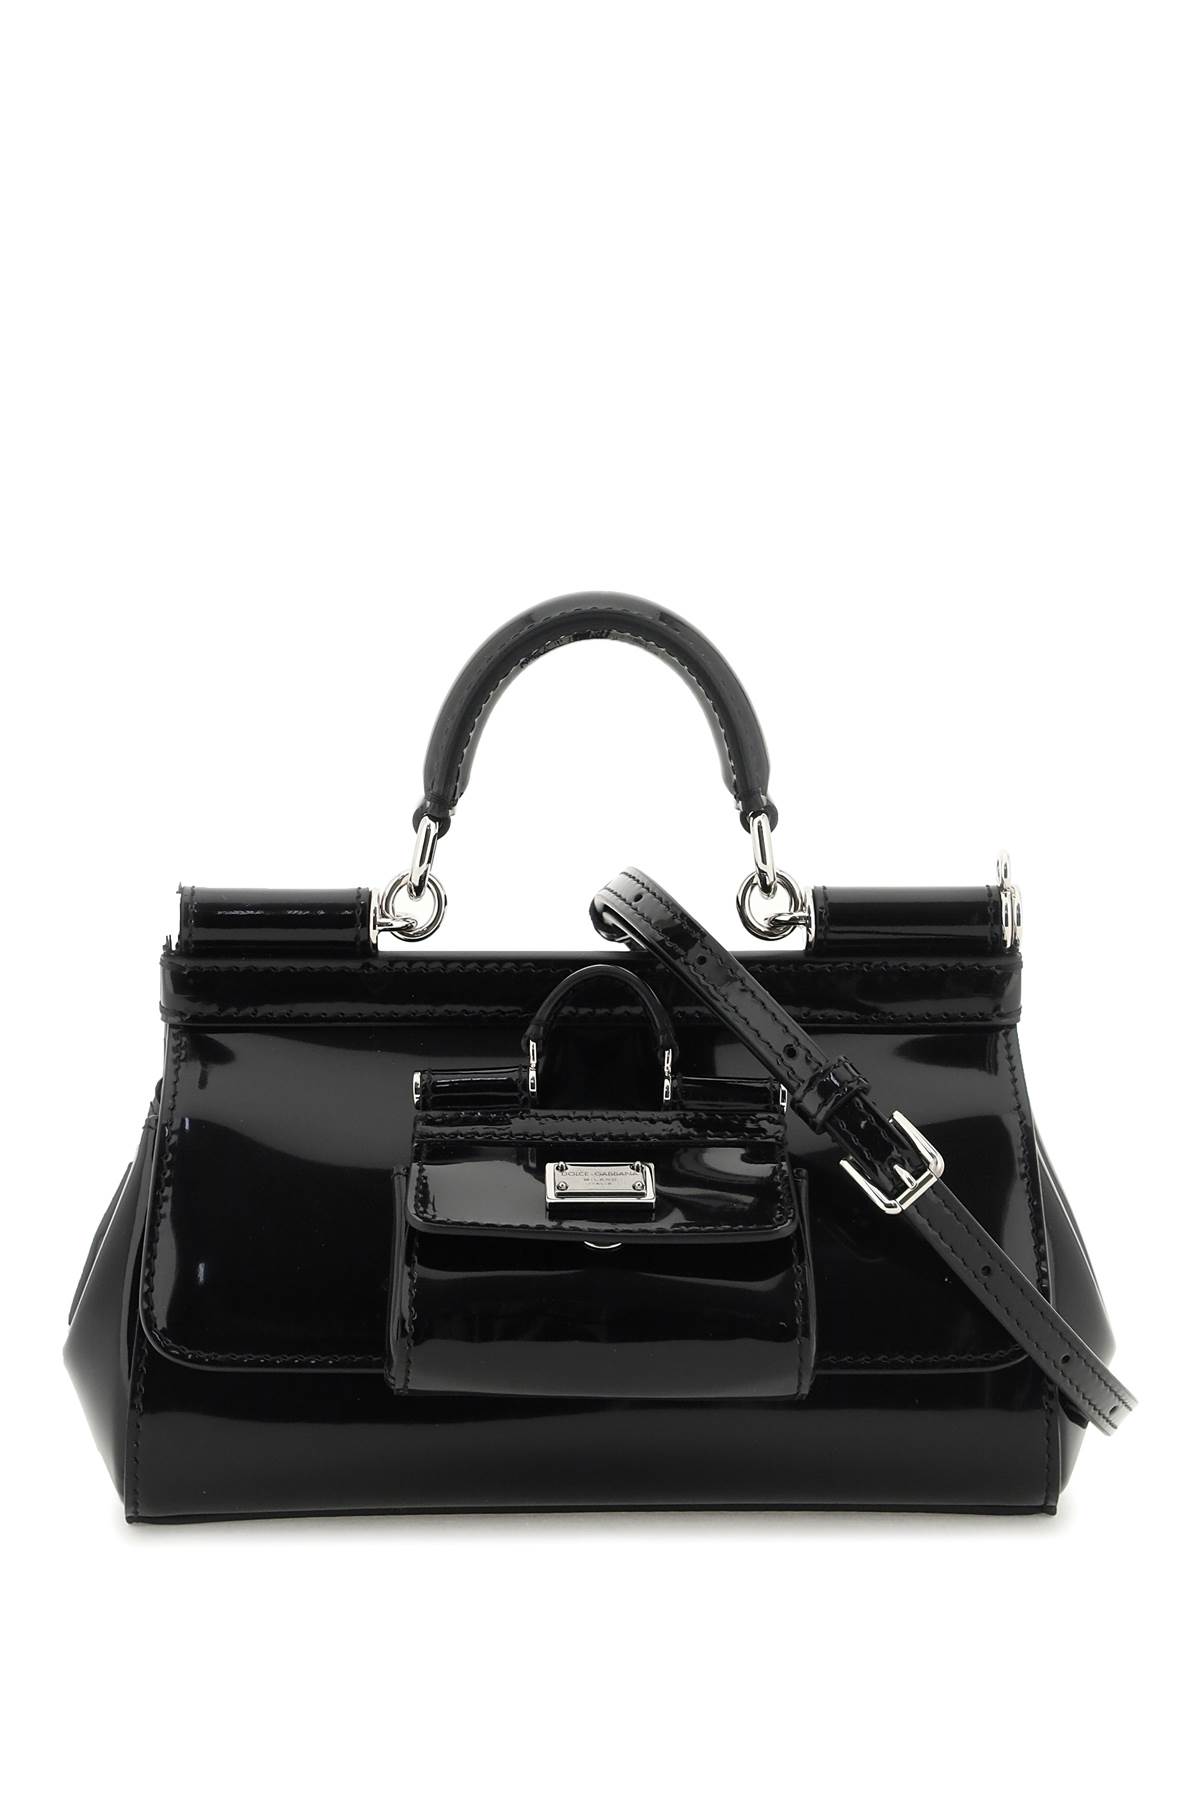 DOLCE & GABBANA PATENT LEATHER SMALL SICILY BAG WITH COIN PURSE